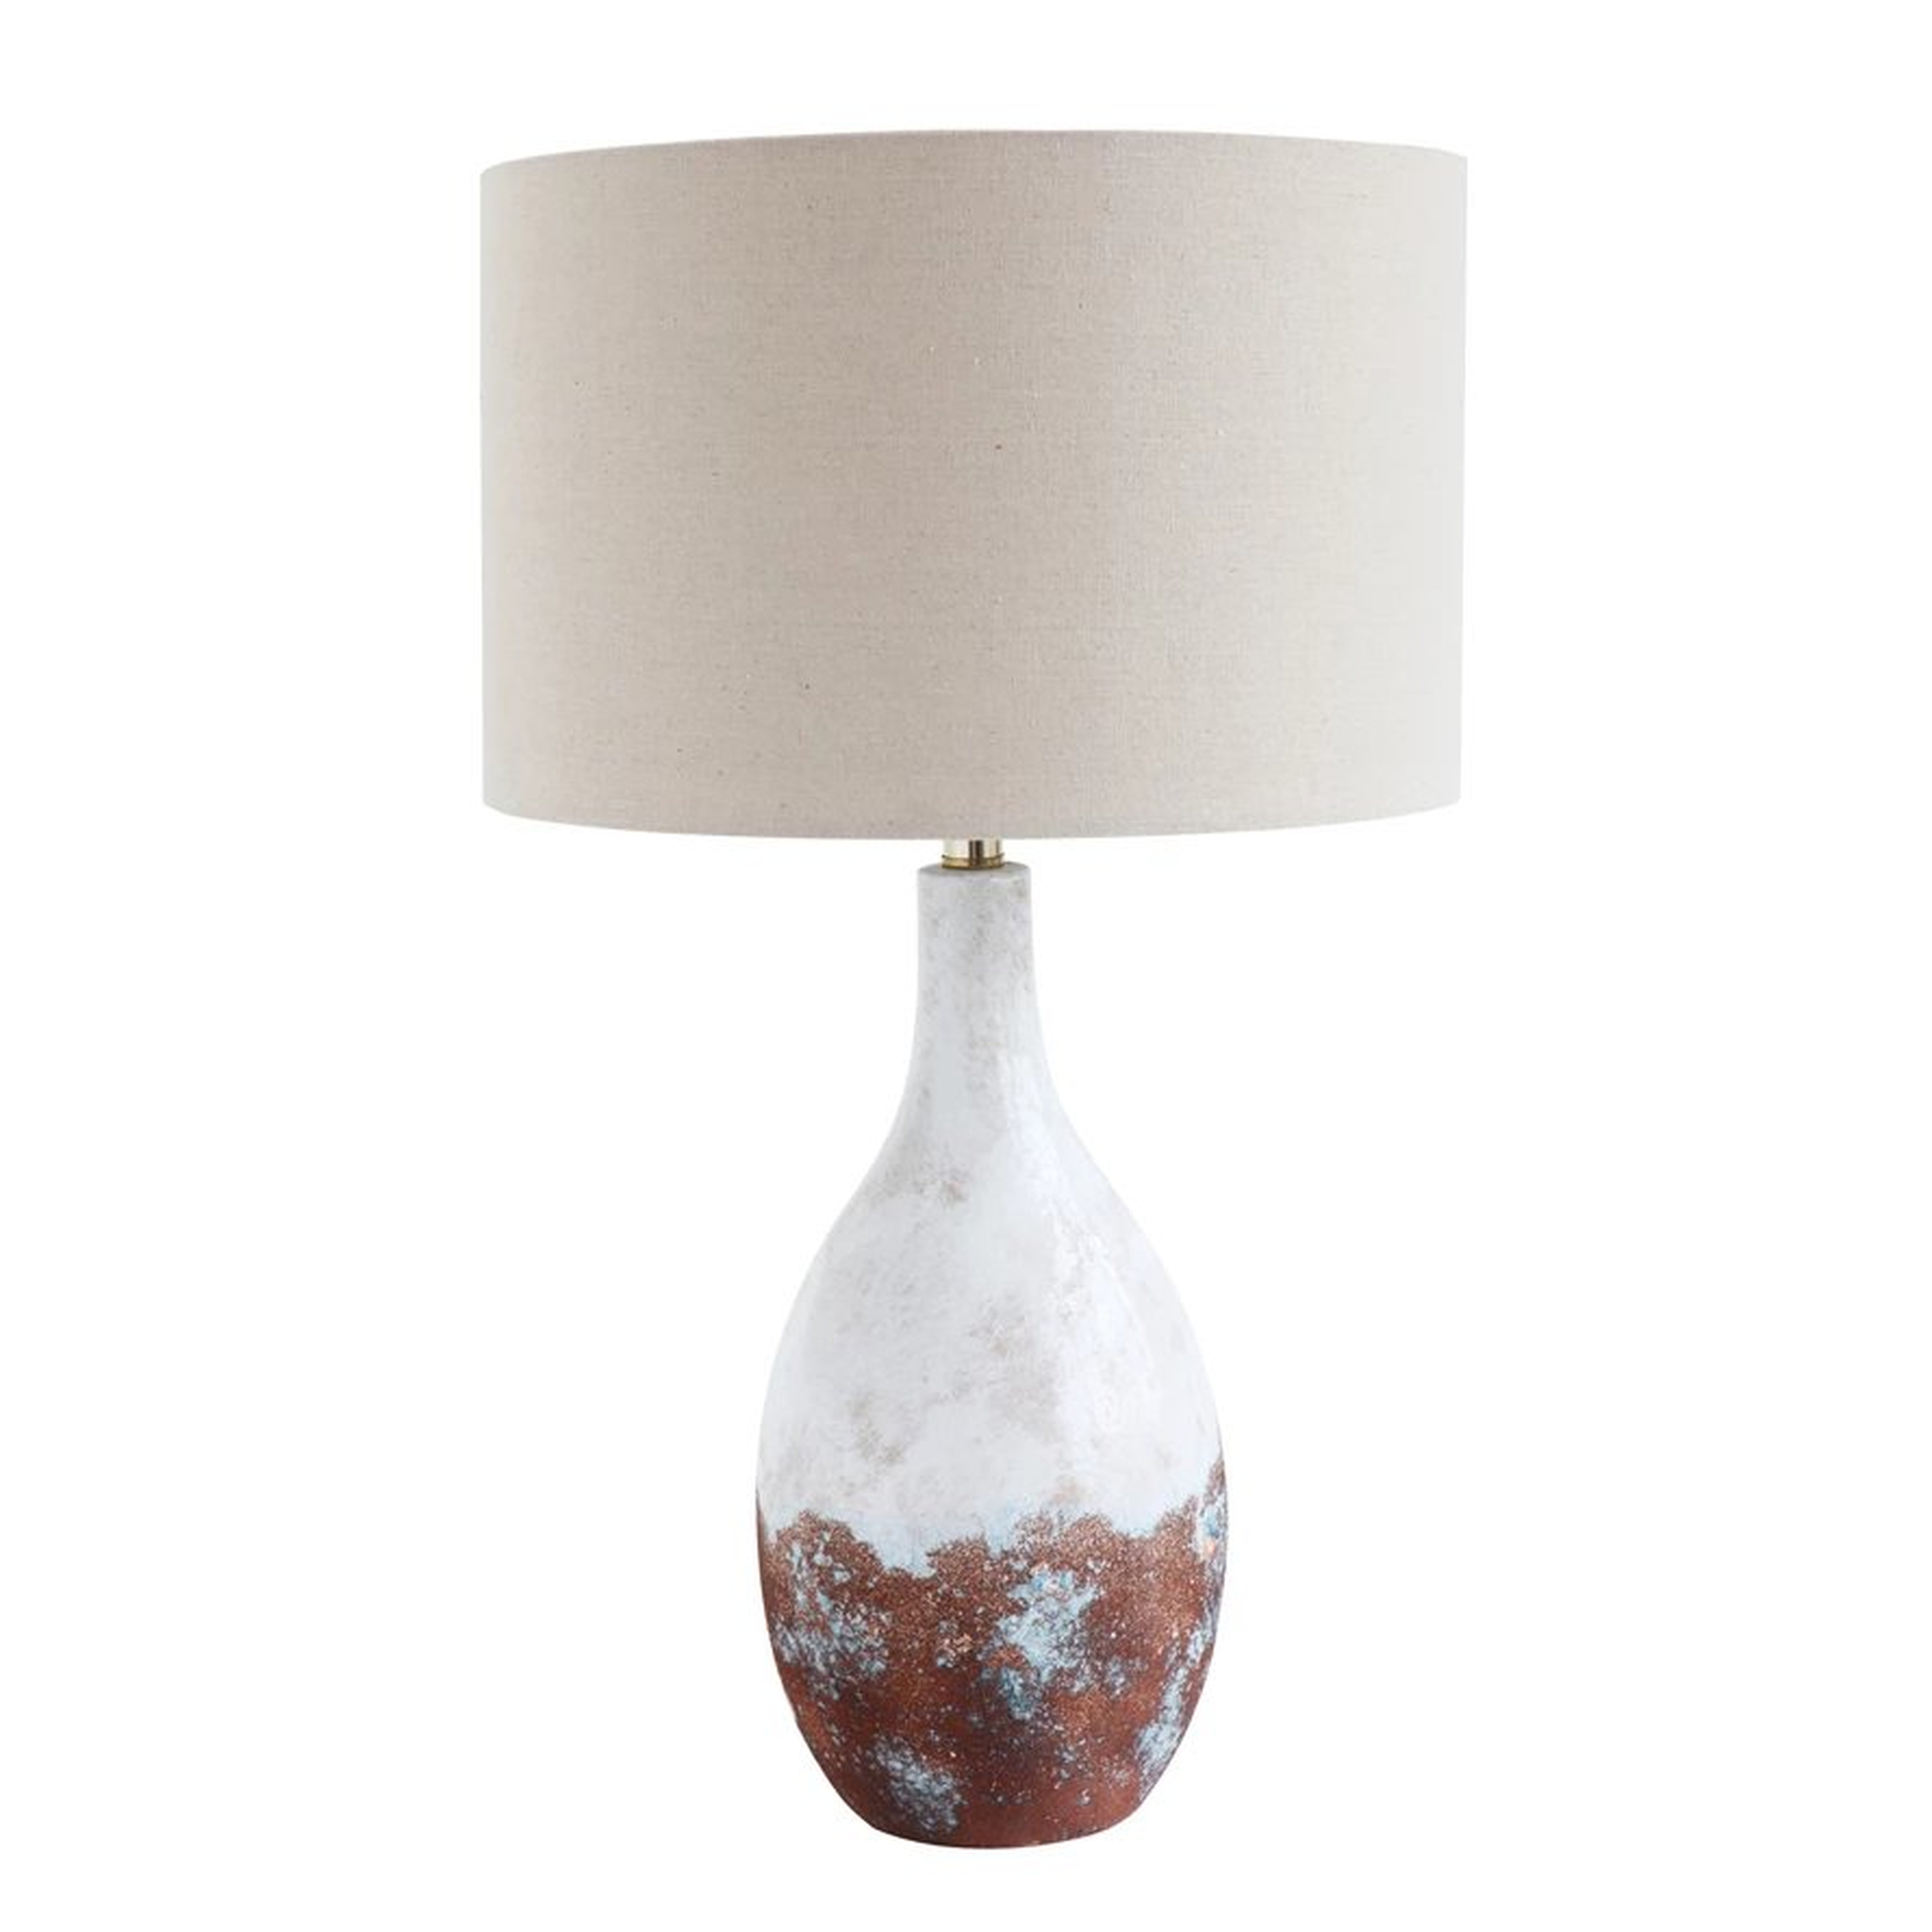 2-Tone Ceramic Table Lamp with Linen Shade (Each one will vary) - Nomad Home